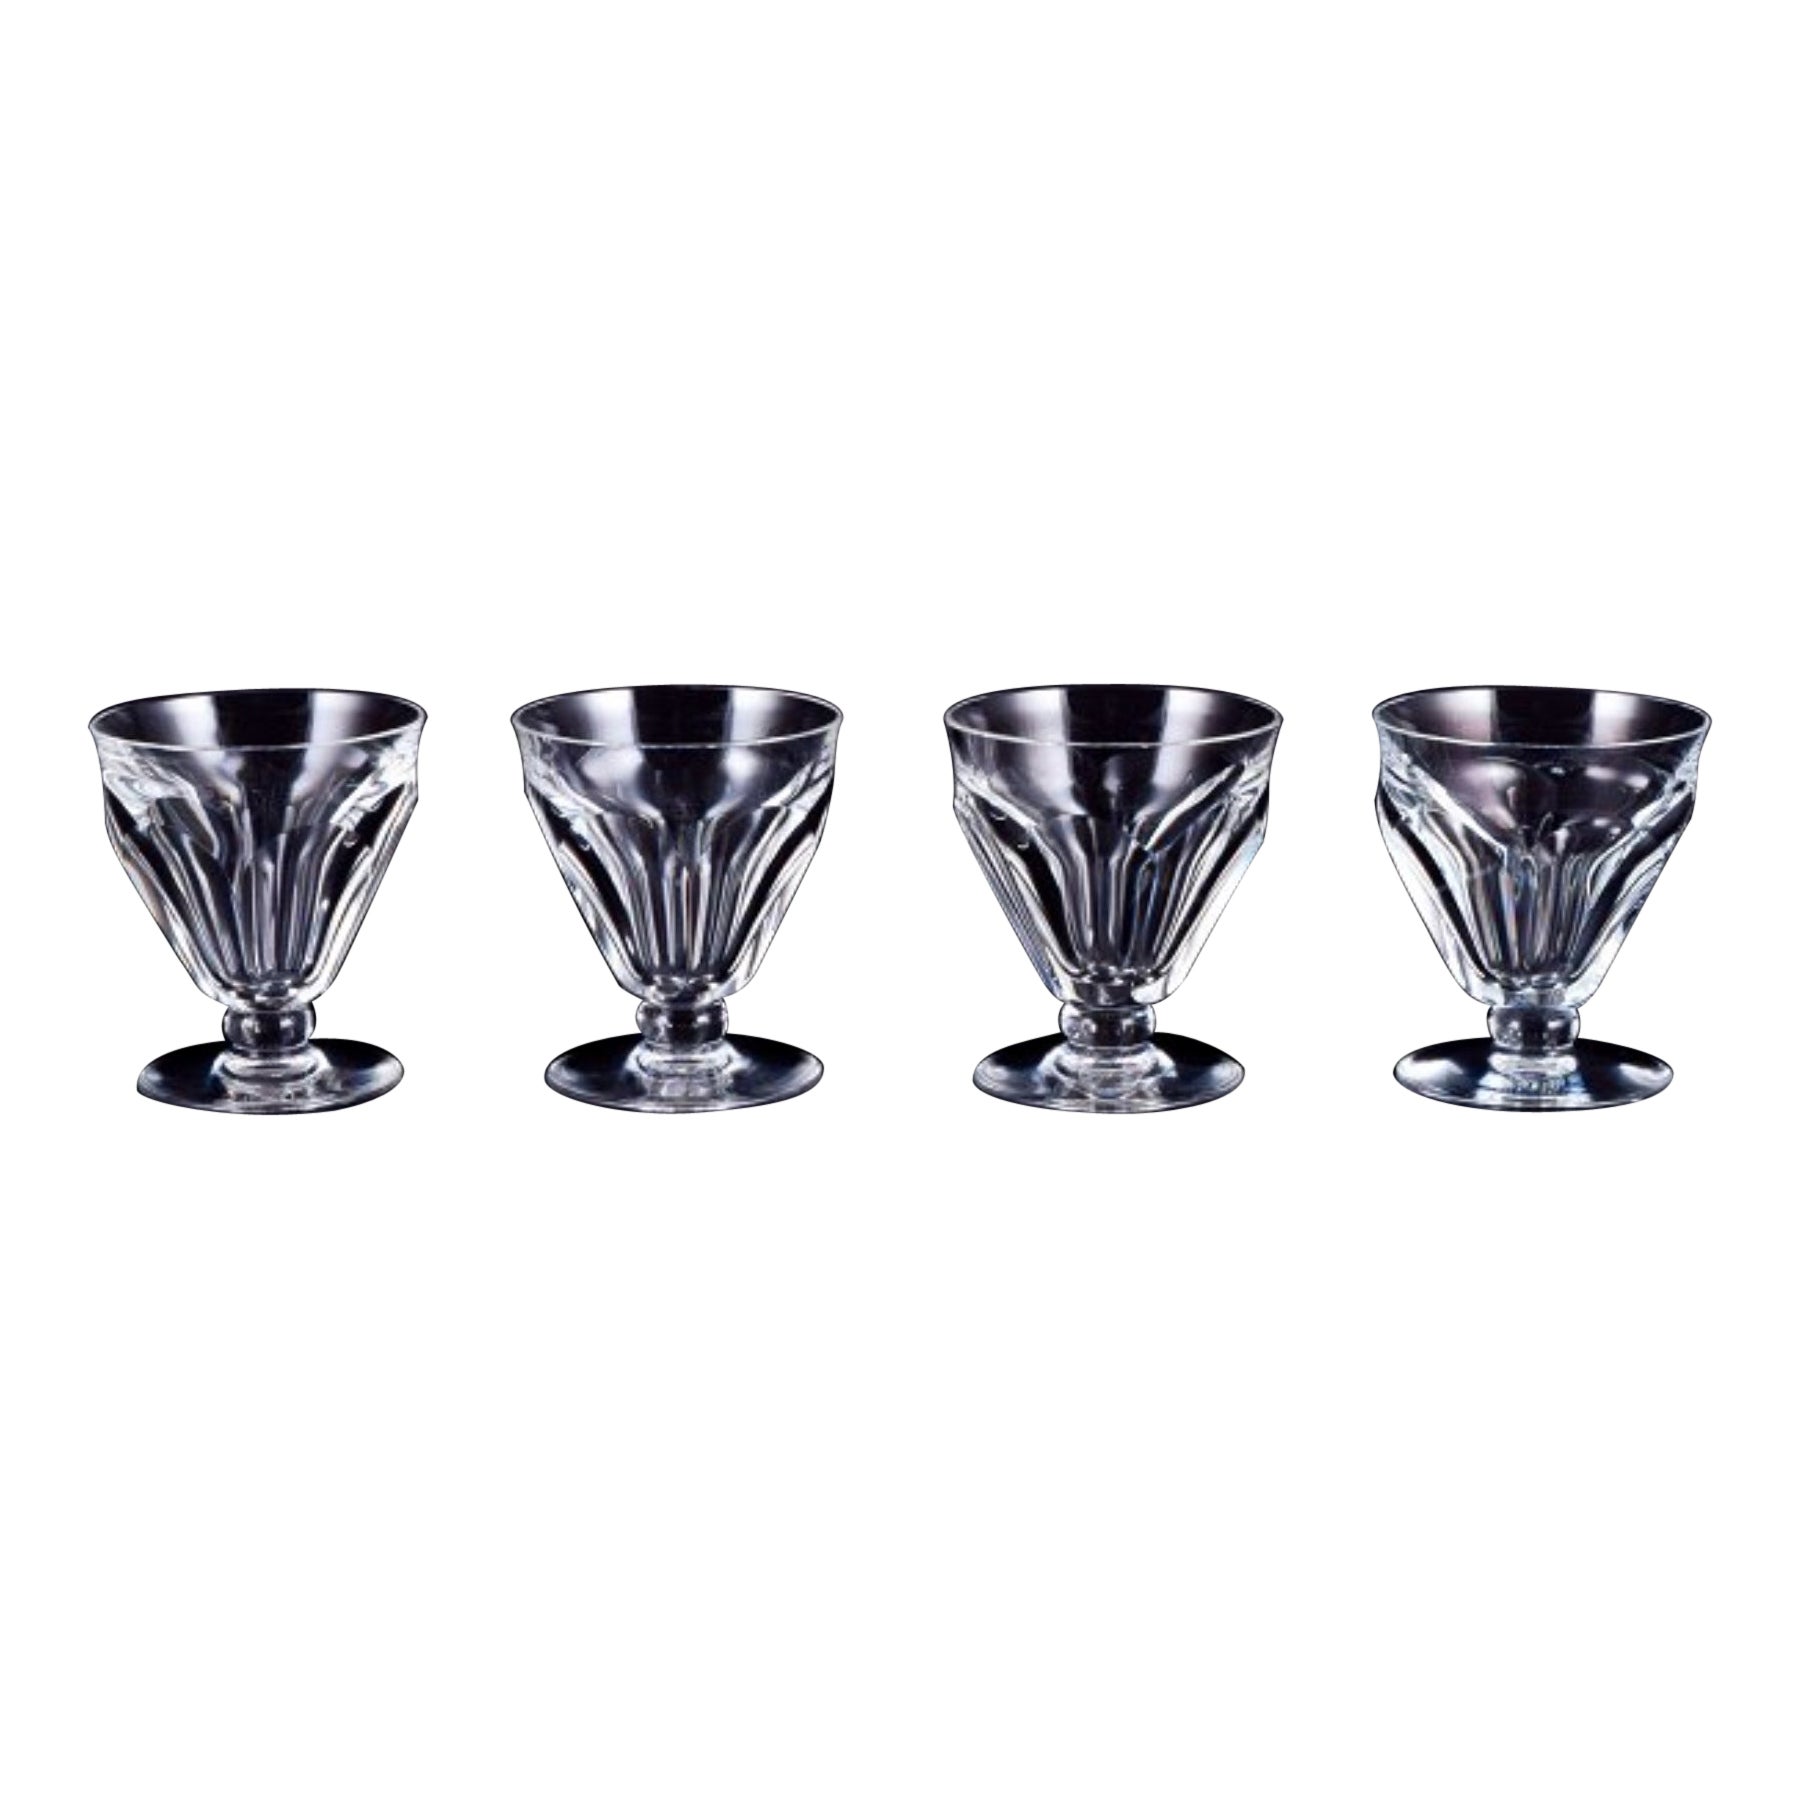 Baccarat, France. Set of four Art Deco white wine glasses in crystal glass